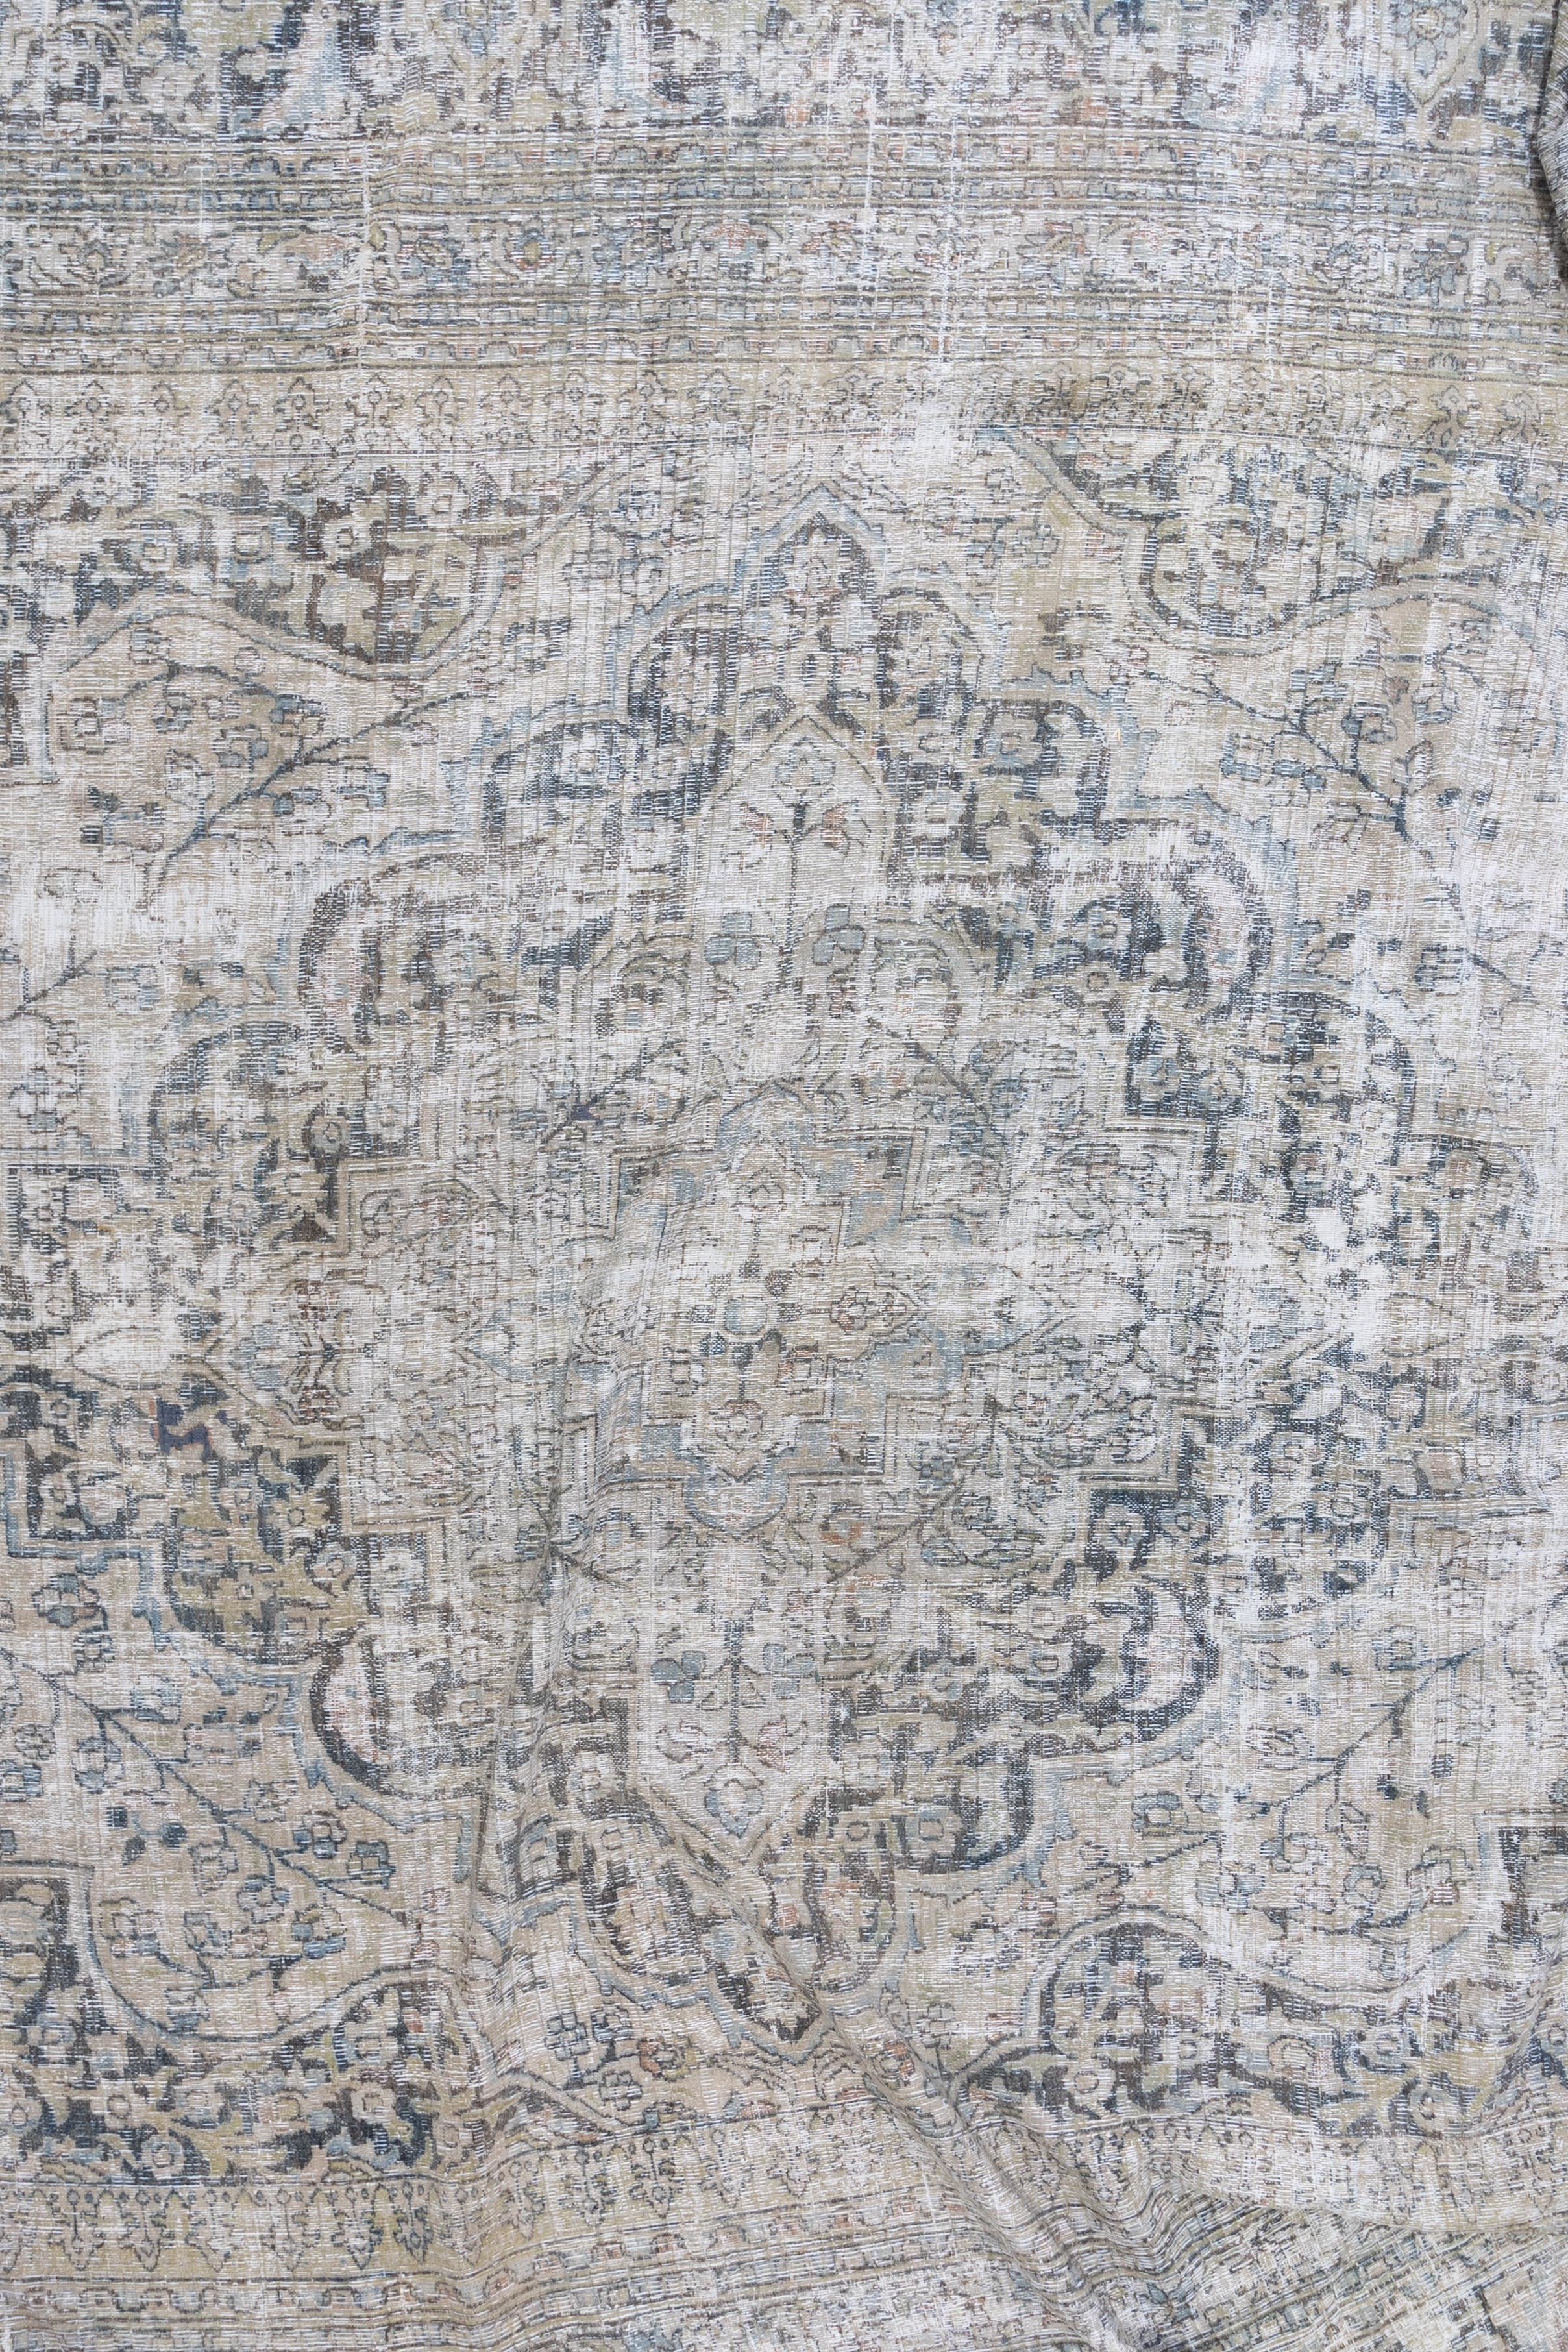 Age: Circa 1910

Colors: grey, cream, brown, blue

Pile: low

Wear Notes: 4-5

Material: Wool on Cotton. 

Wear Guide:
Vintage and antique rugs are by nature, pre-loved and may show evidence of their past. There are varying degrees of wear to